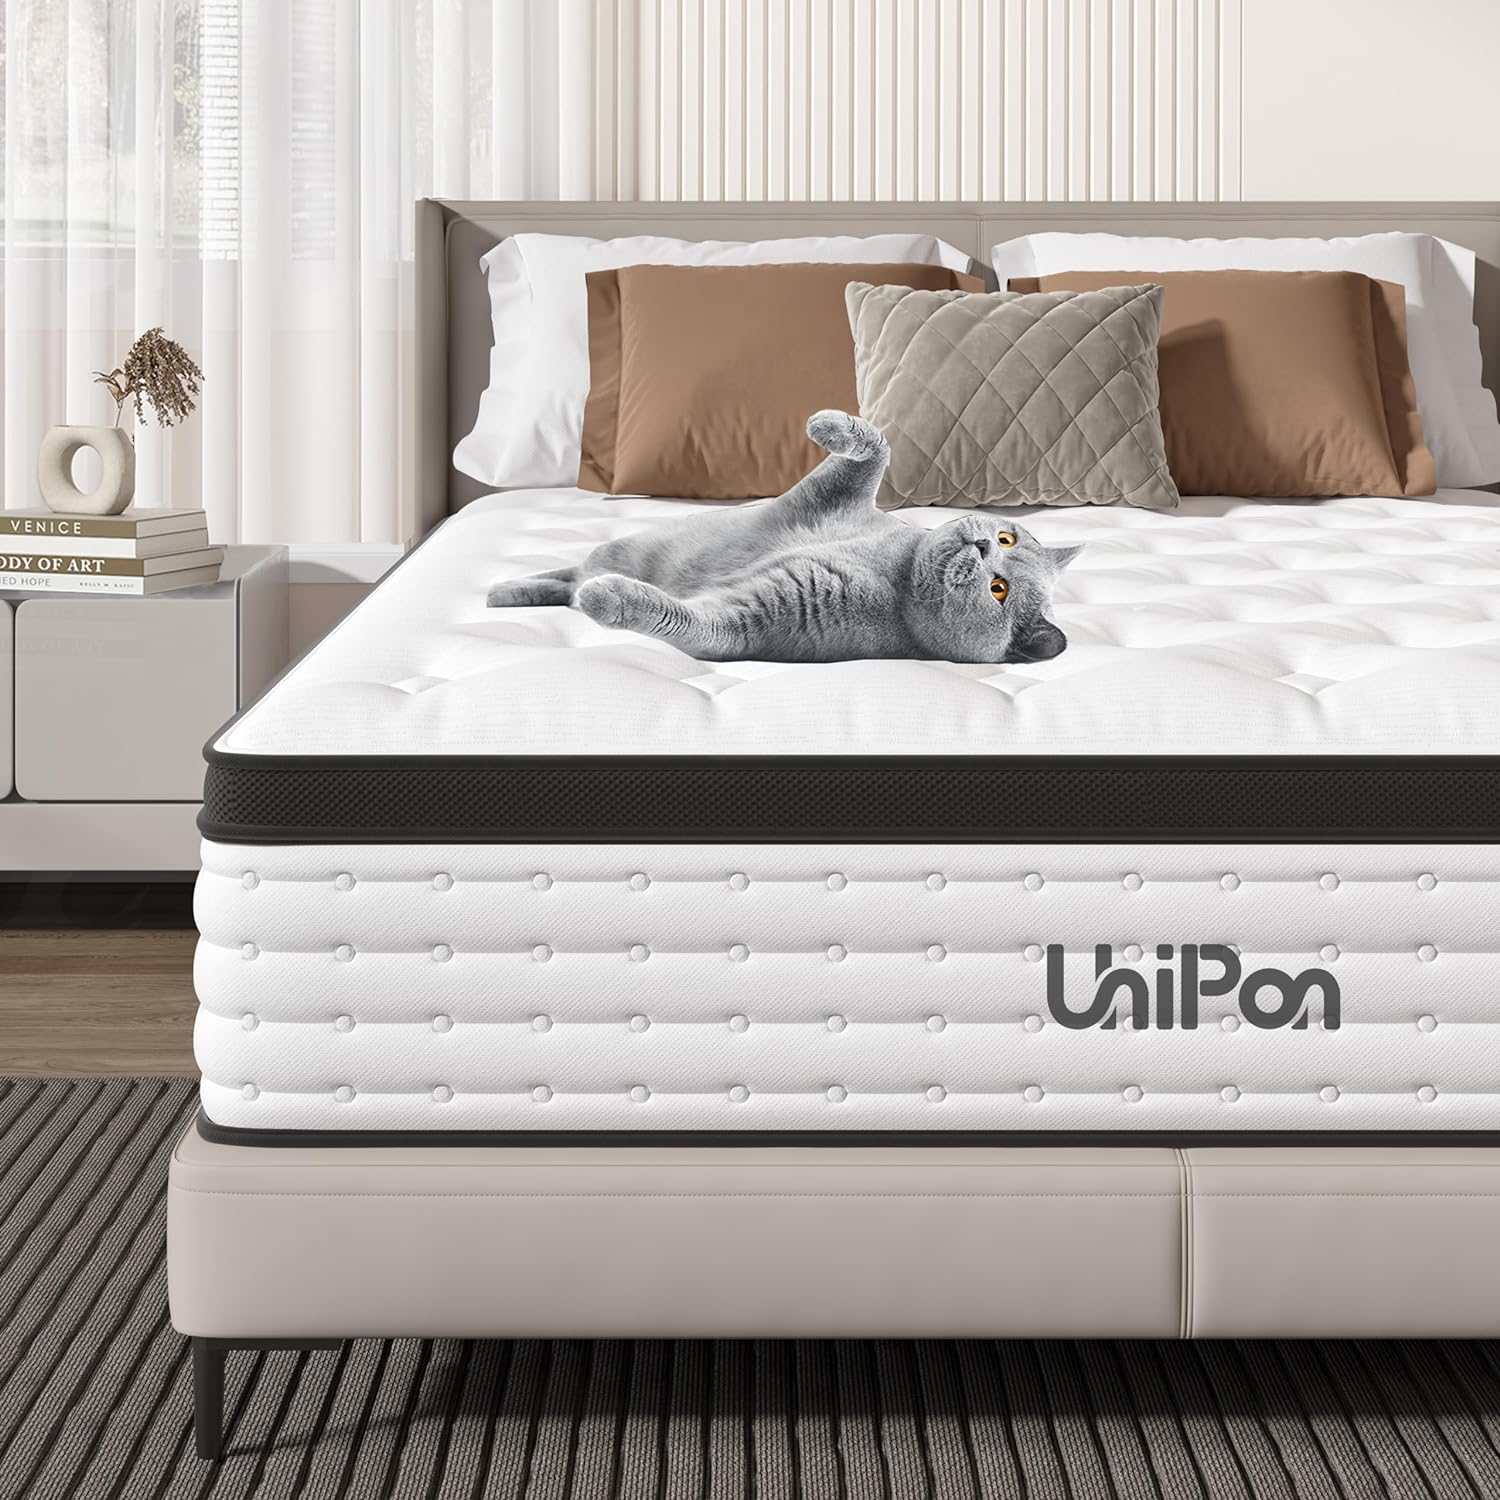 UniPon 12 Inch Hybrid Mattress Twin, Spring Mattress with Gel Memory Foam, Medium Firm Mattress, Made in USA, Supportive Individually Pocket Spring Mattress, Bed in a Box, Pressure Relief